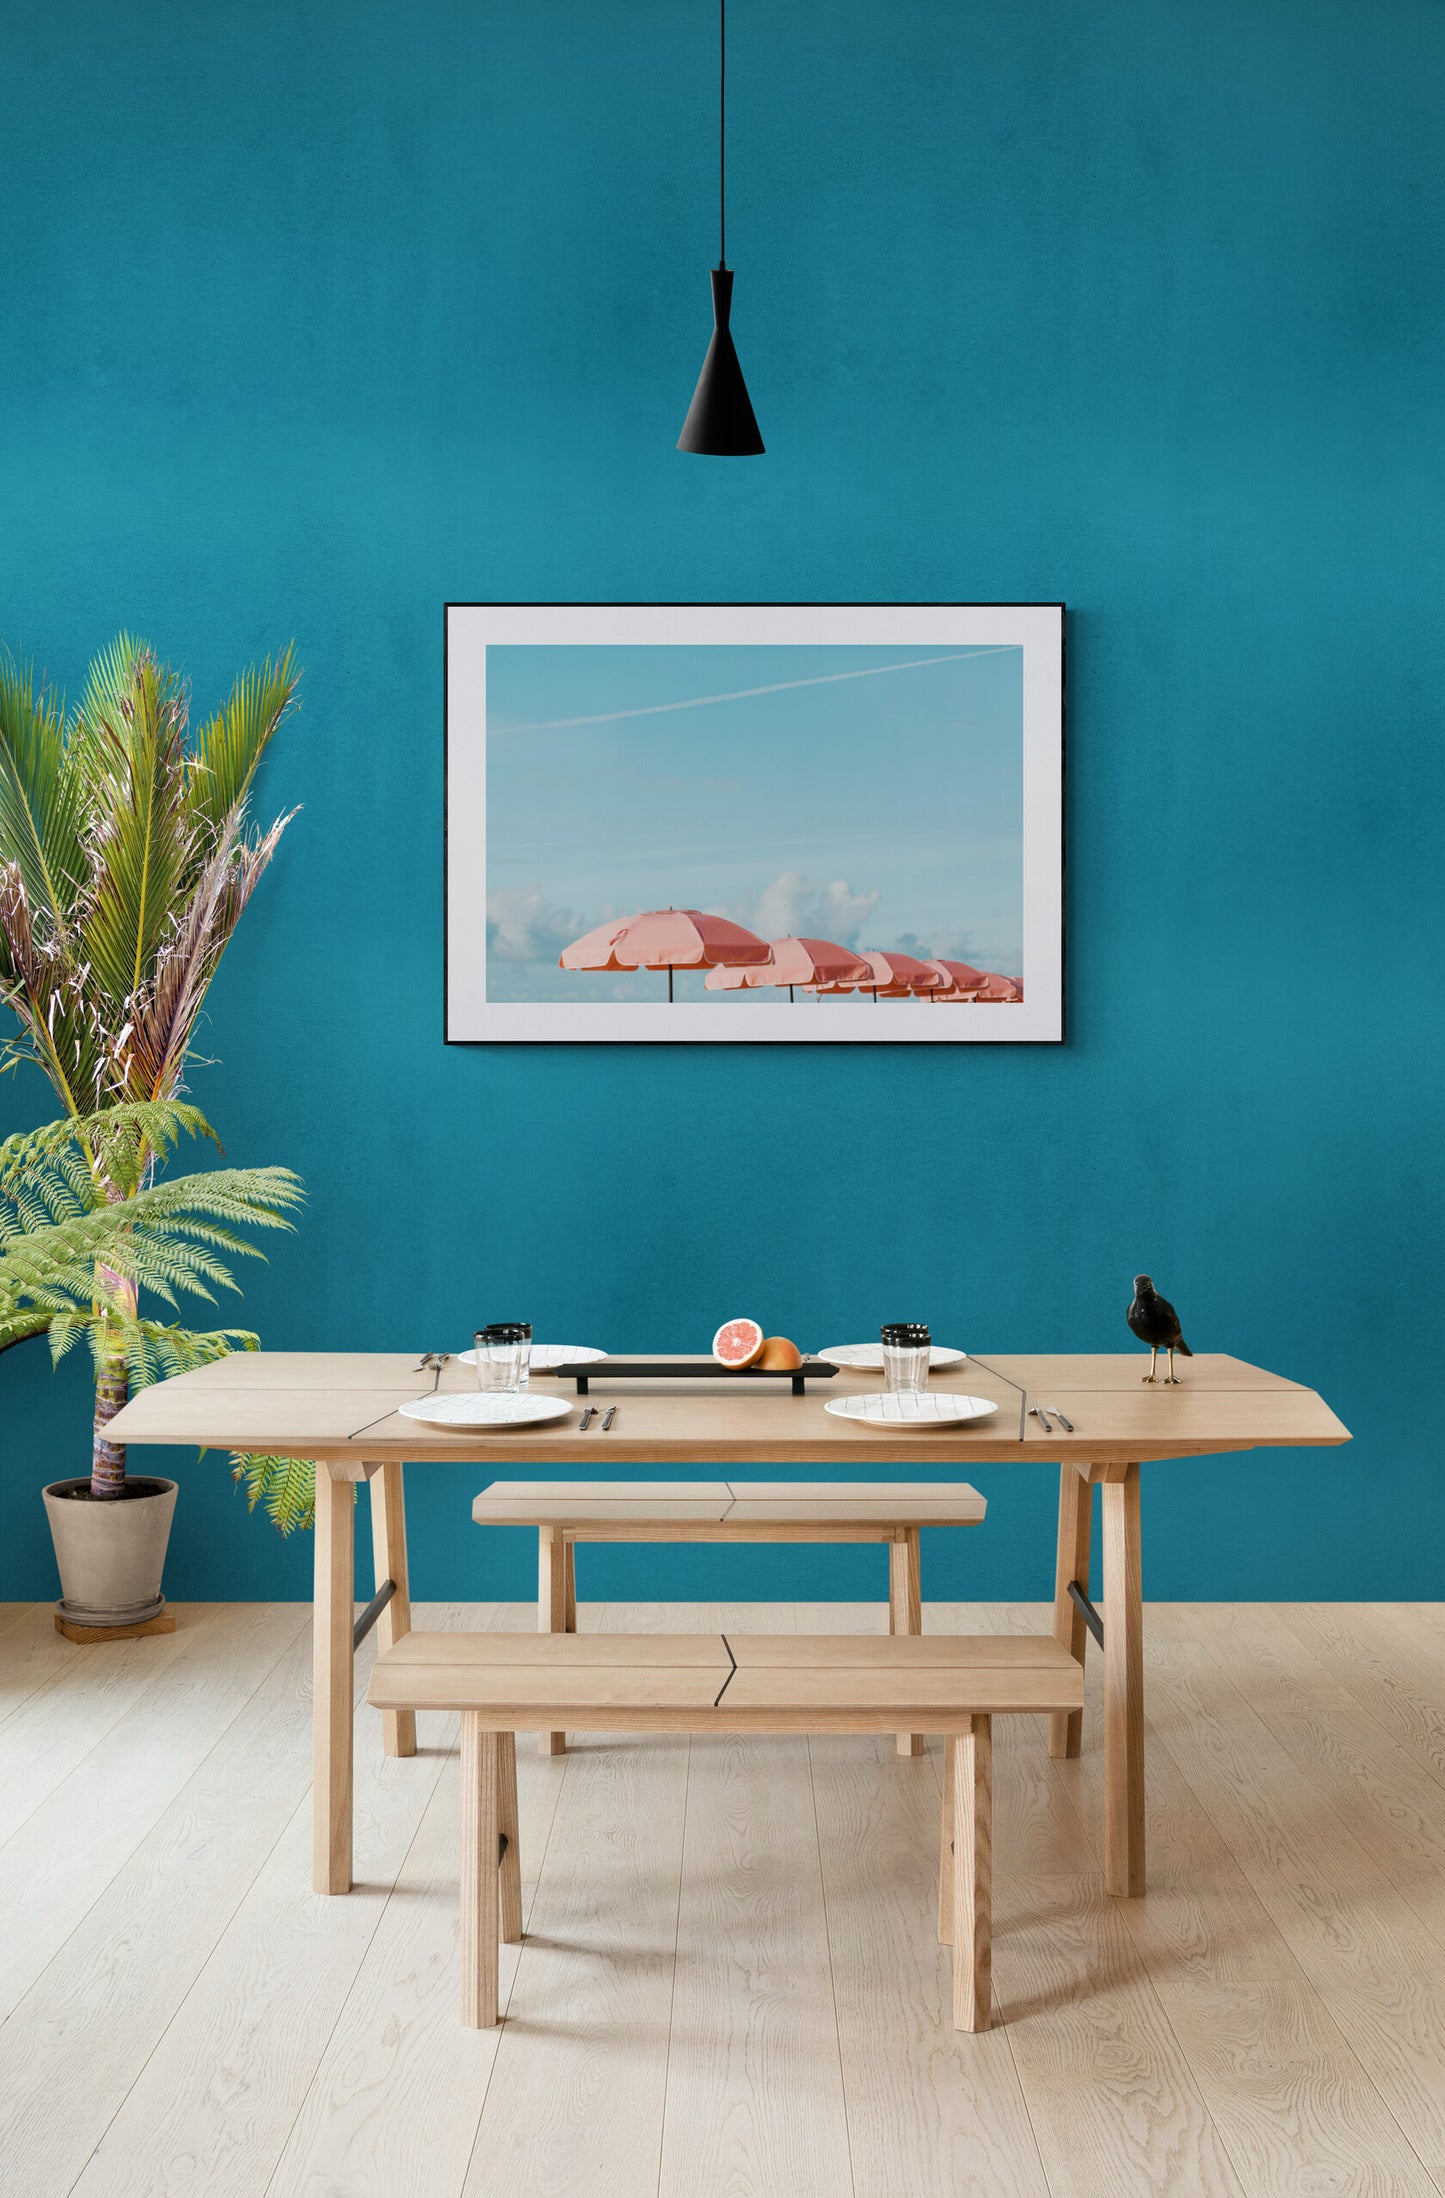 beach umbrellas photographs of turks and caicos in a dining room as wall art